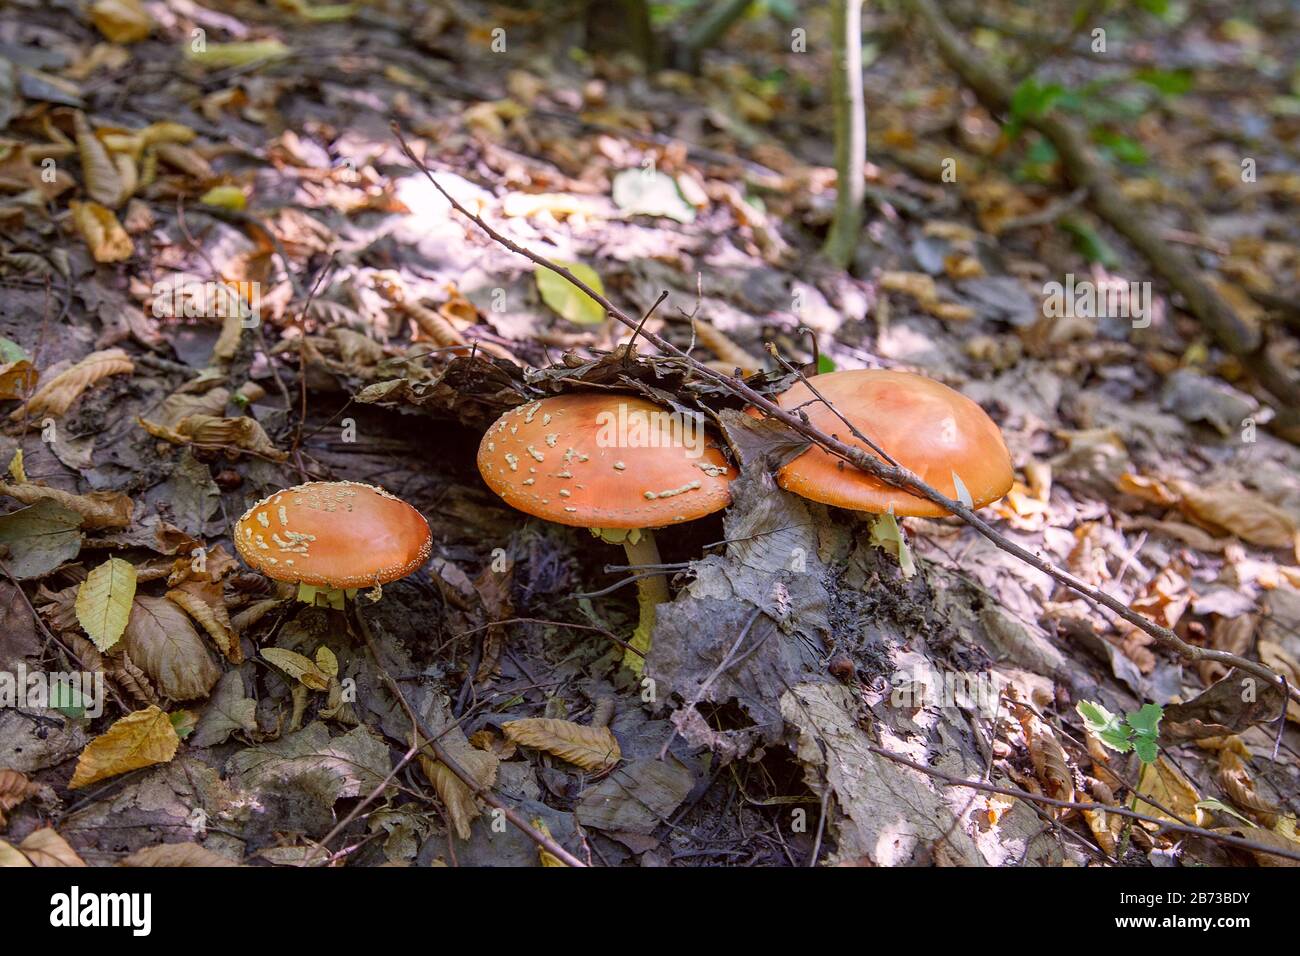 Wild Fly Agaric with red cup mushroom is beautiful mushroom but very toxic. Mushroom family of The Fly Agaric or Fly Amanita (Amanita muscaria) is now Stock Photo